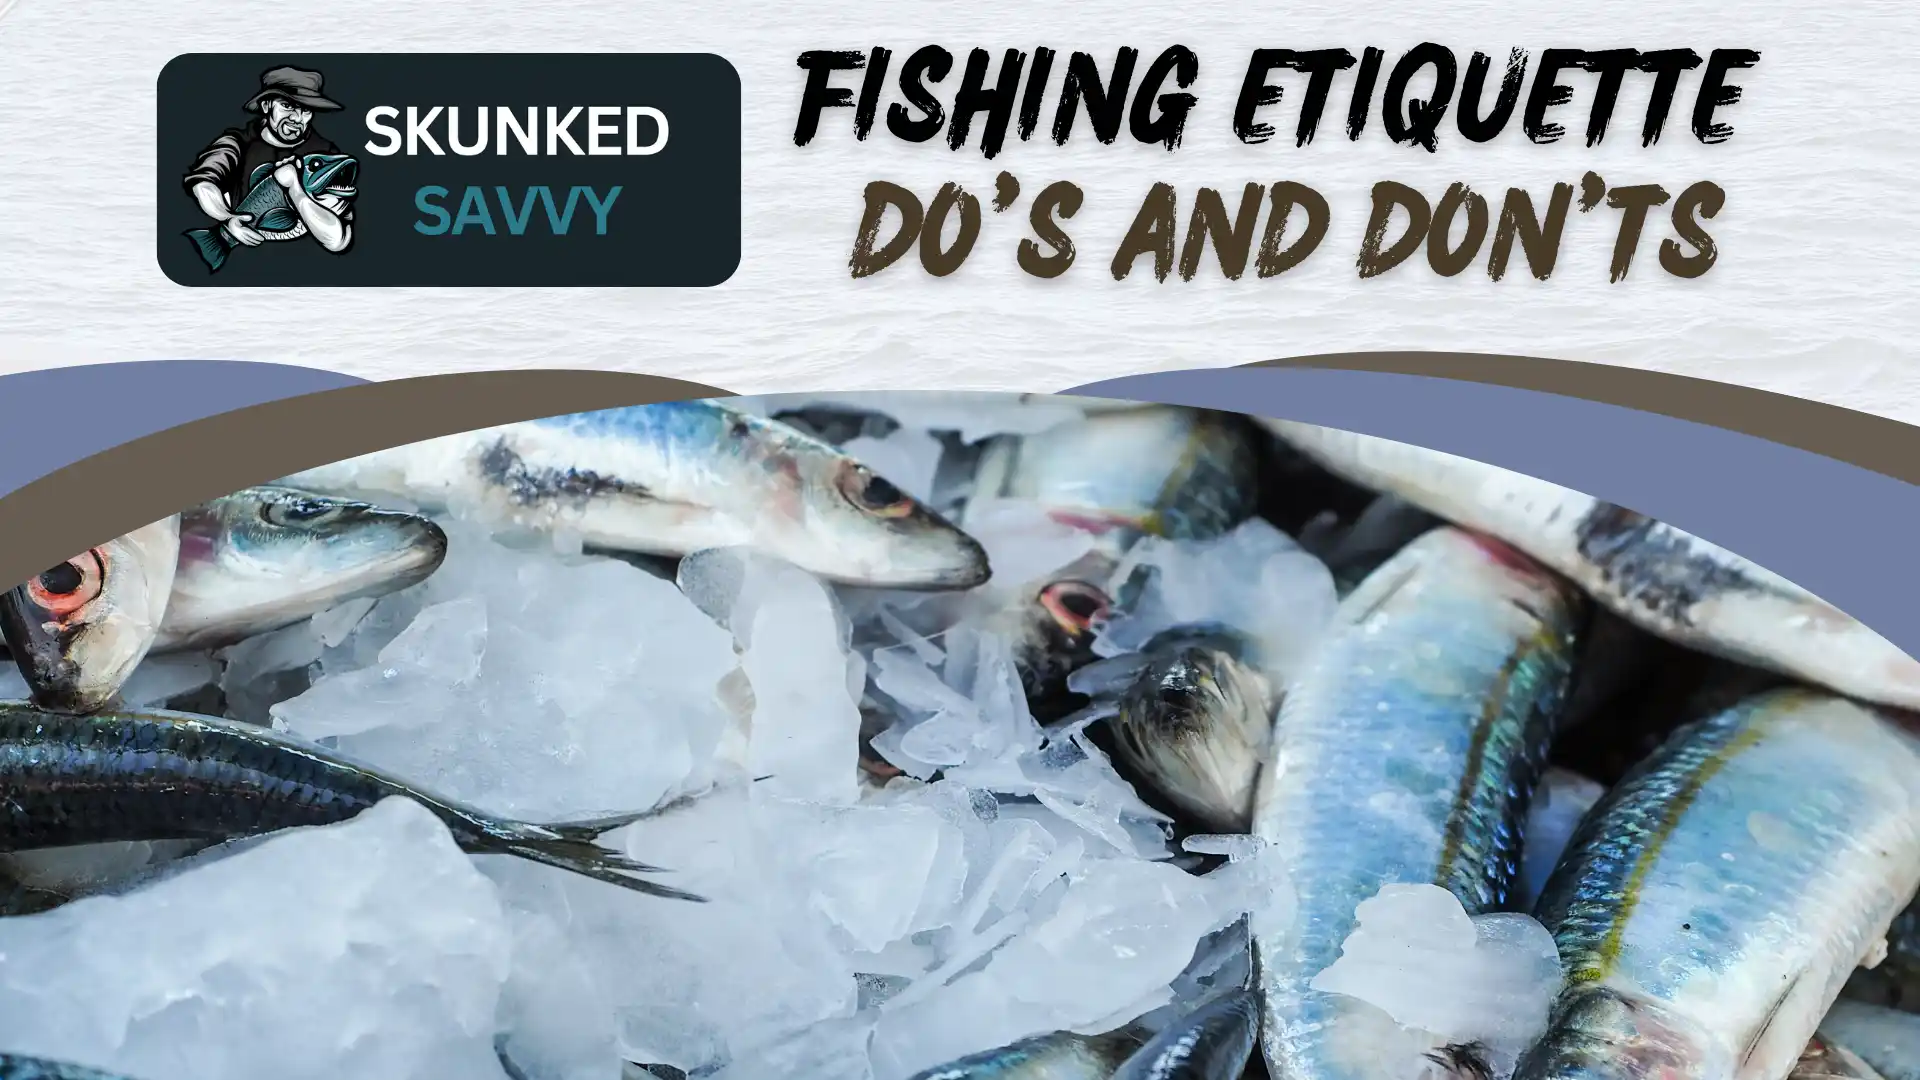 Fishing Etiquette Does and Does not